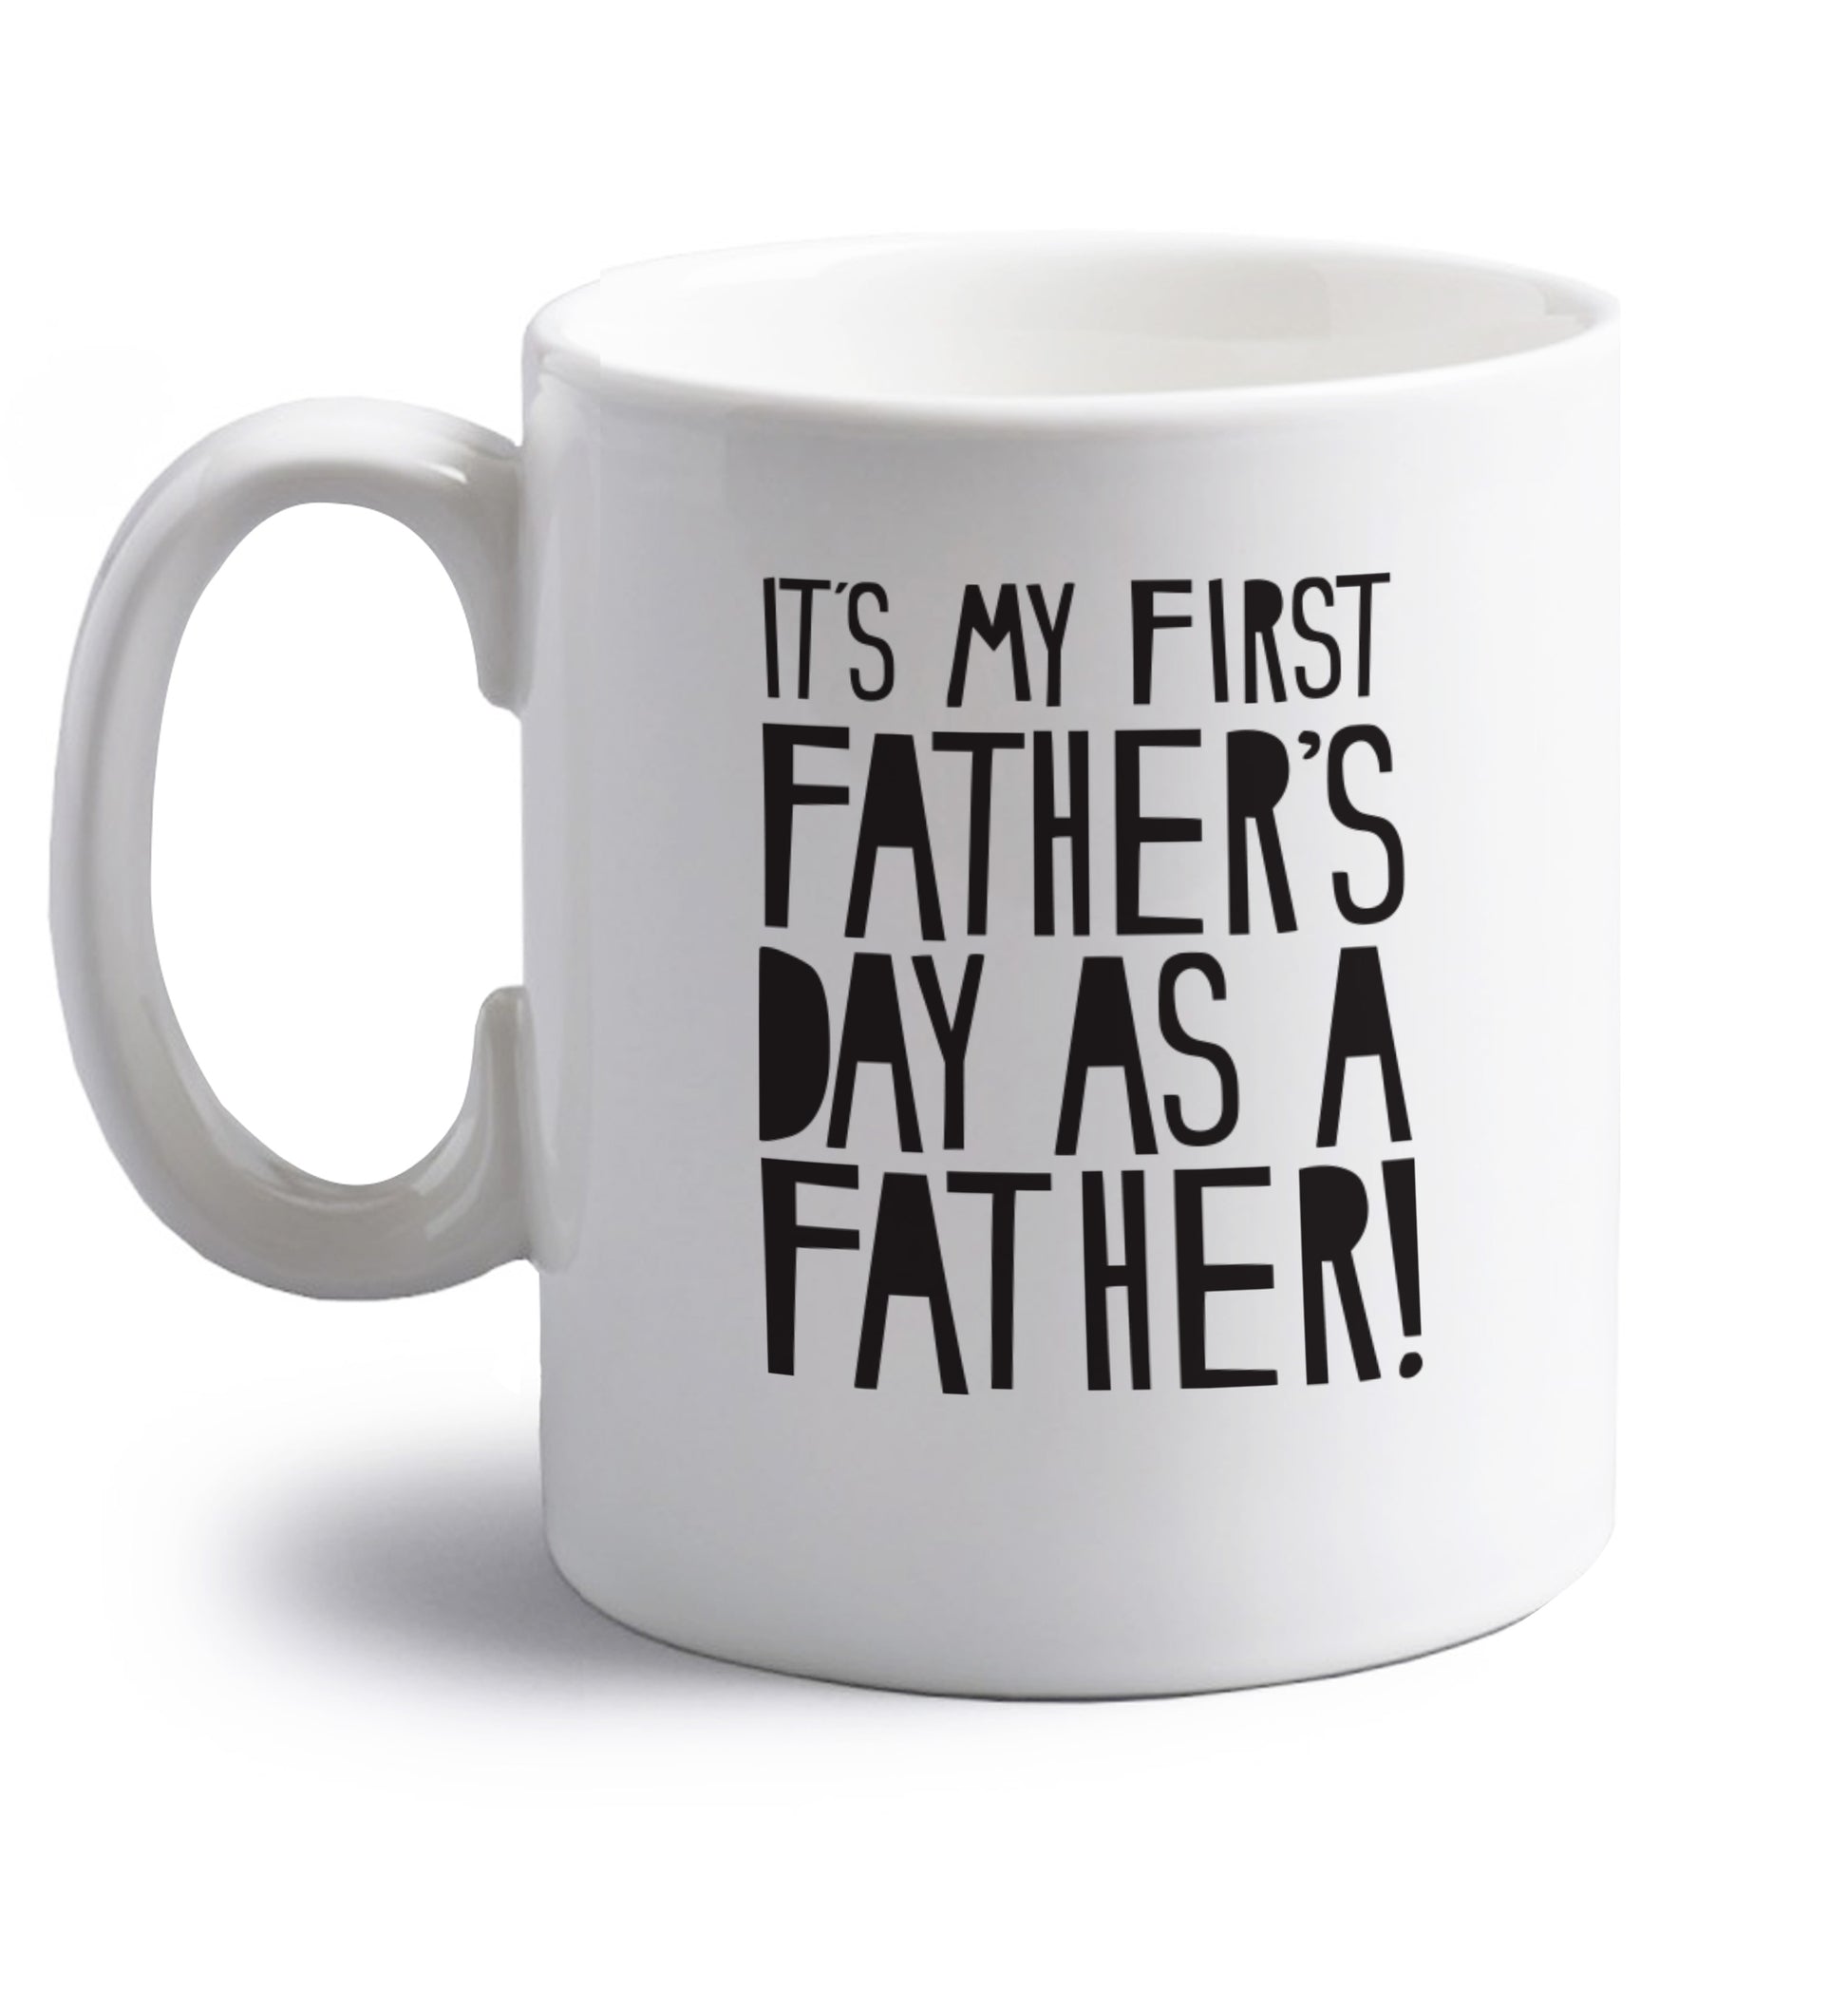 It's my first Father's Day as a father! right handed white ceramic mug 